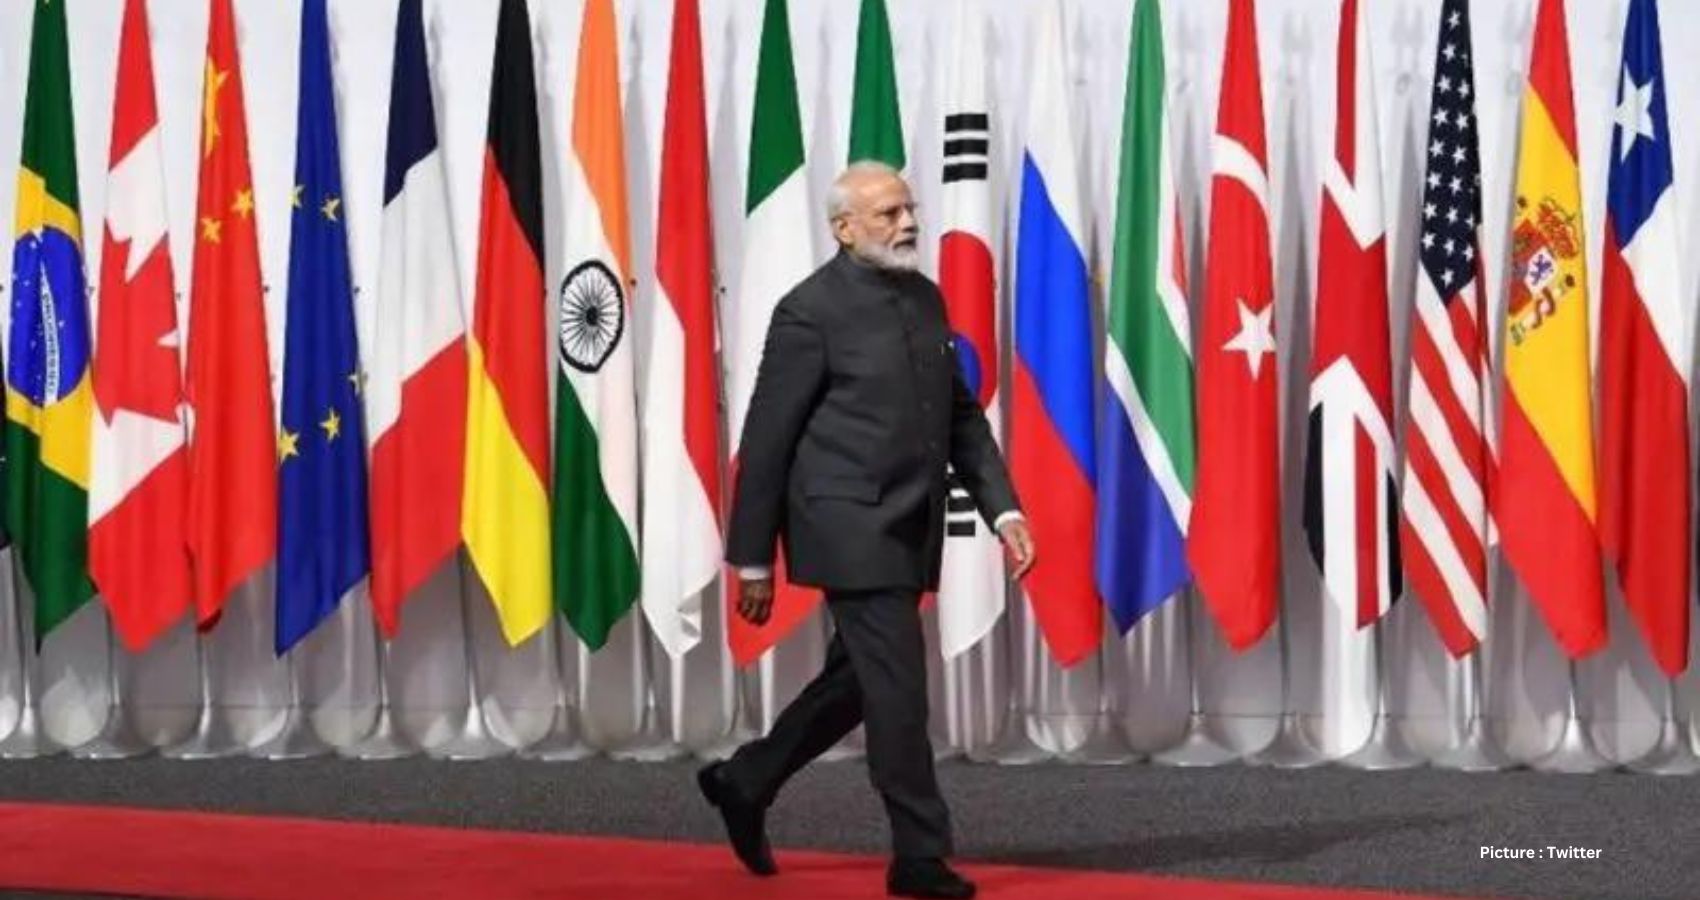 India Contemplates BRICS Currency: Finance Experts Engaged in Deliberation Ahead of Summit